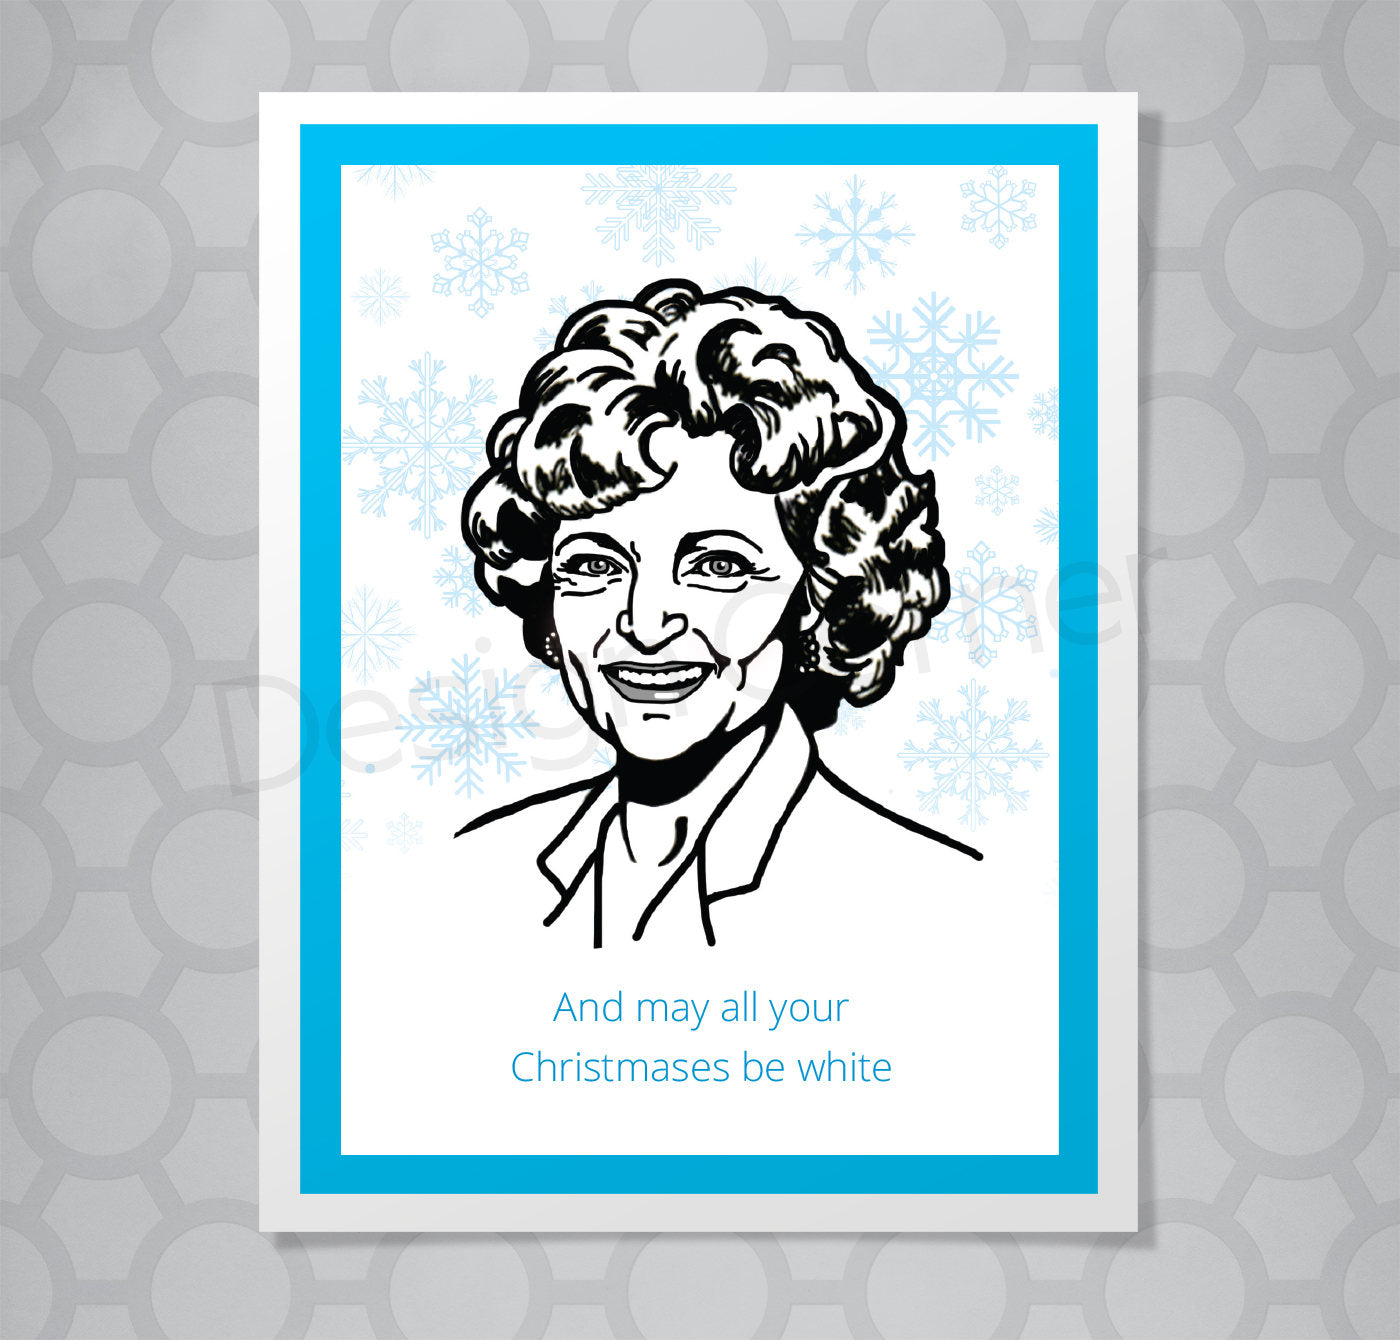 Illustration of Golden Girls Rose on a greeting card with snowflakes with caption "May all your Christmases be white."